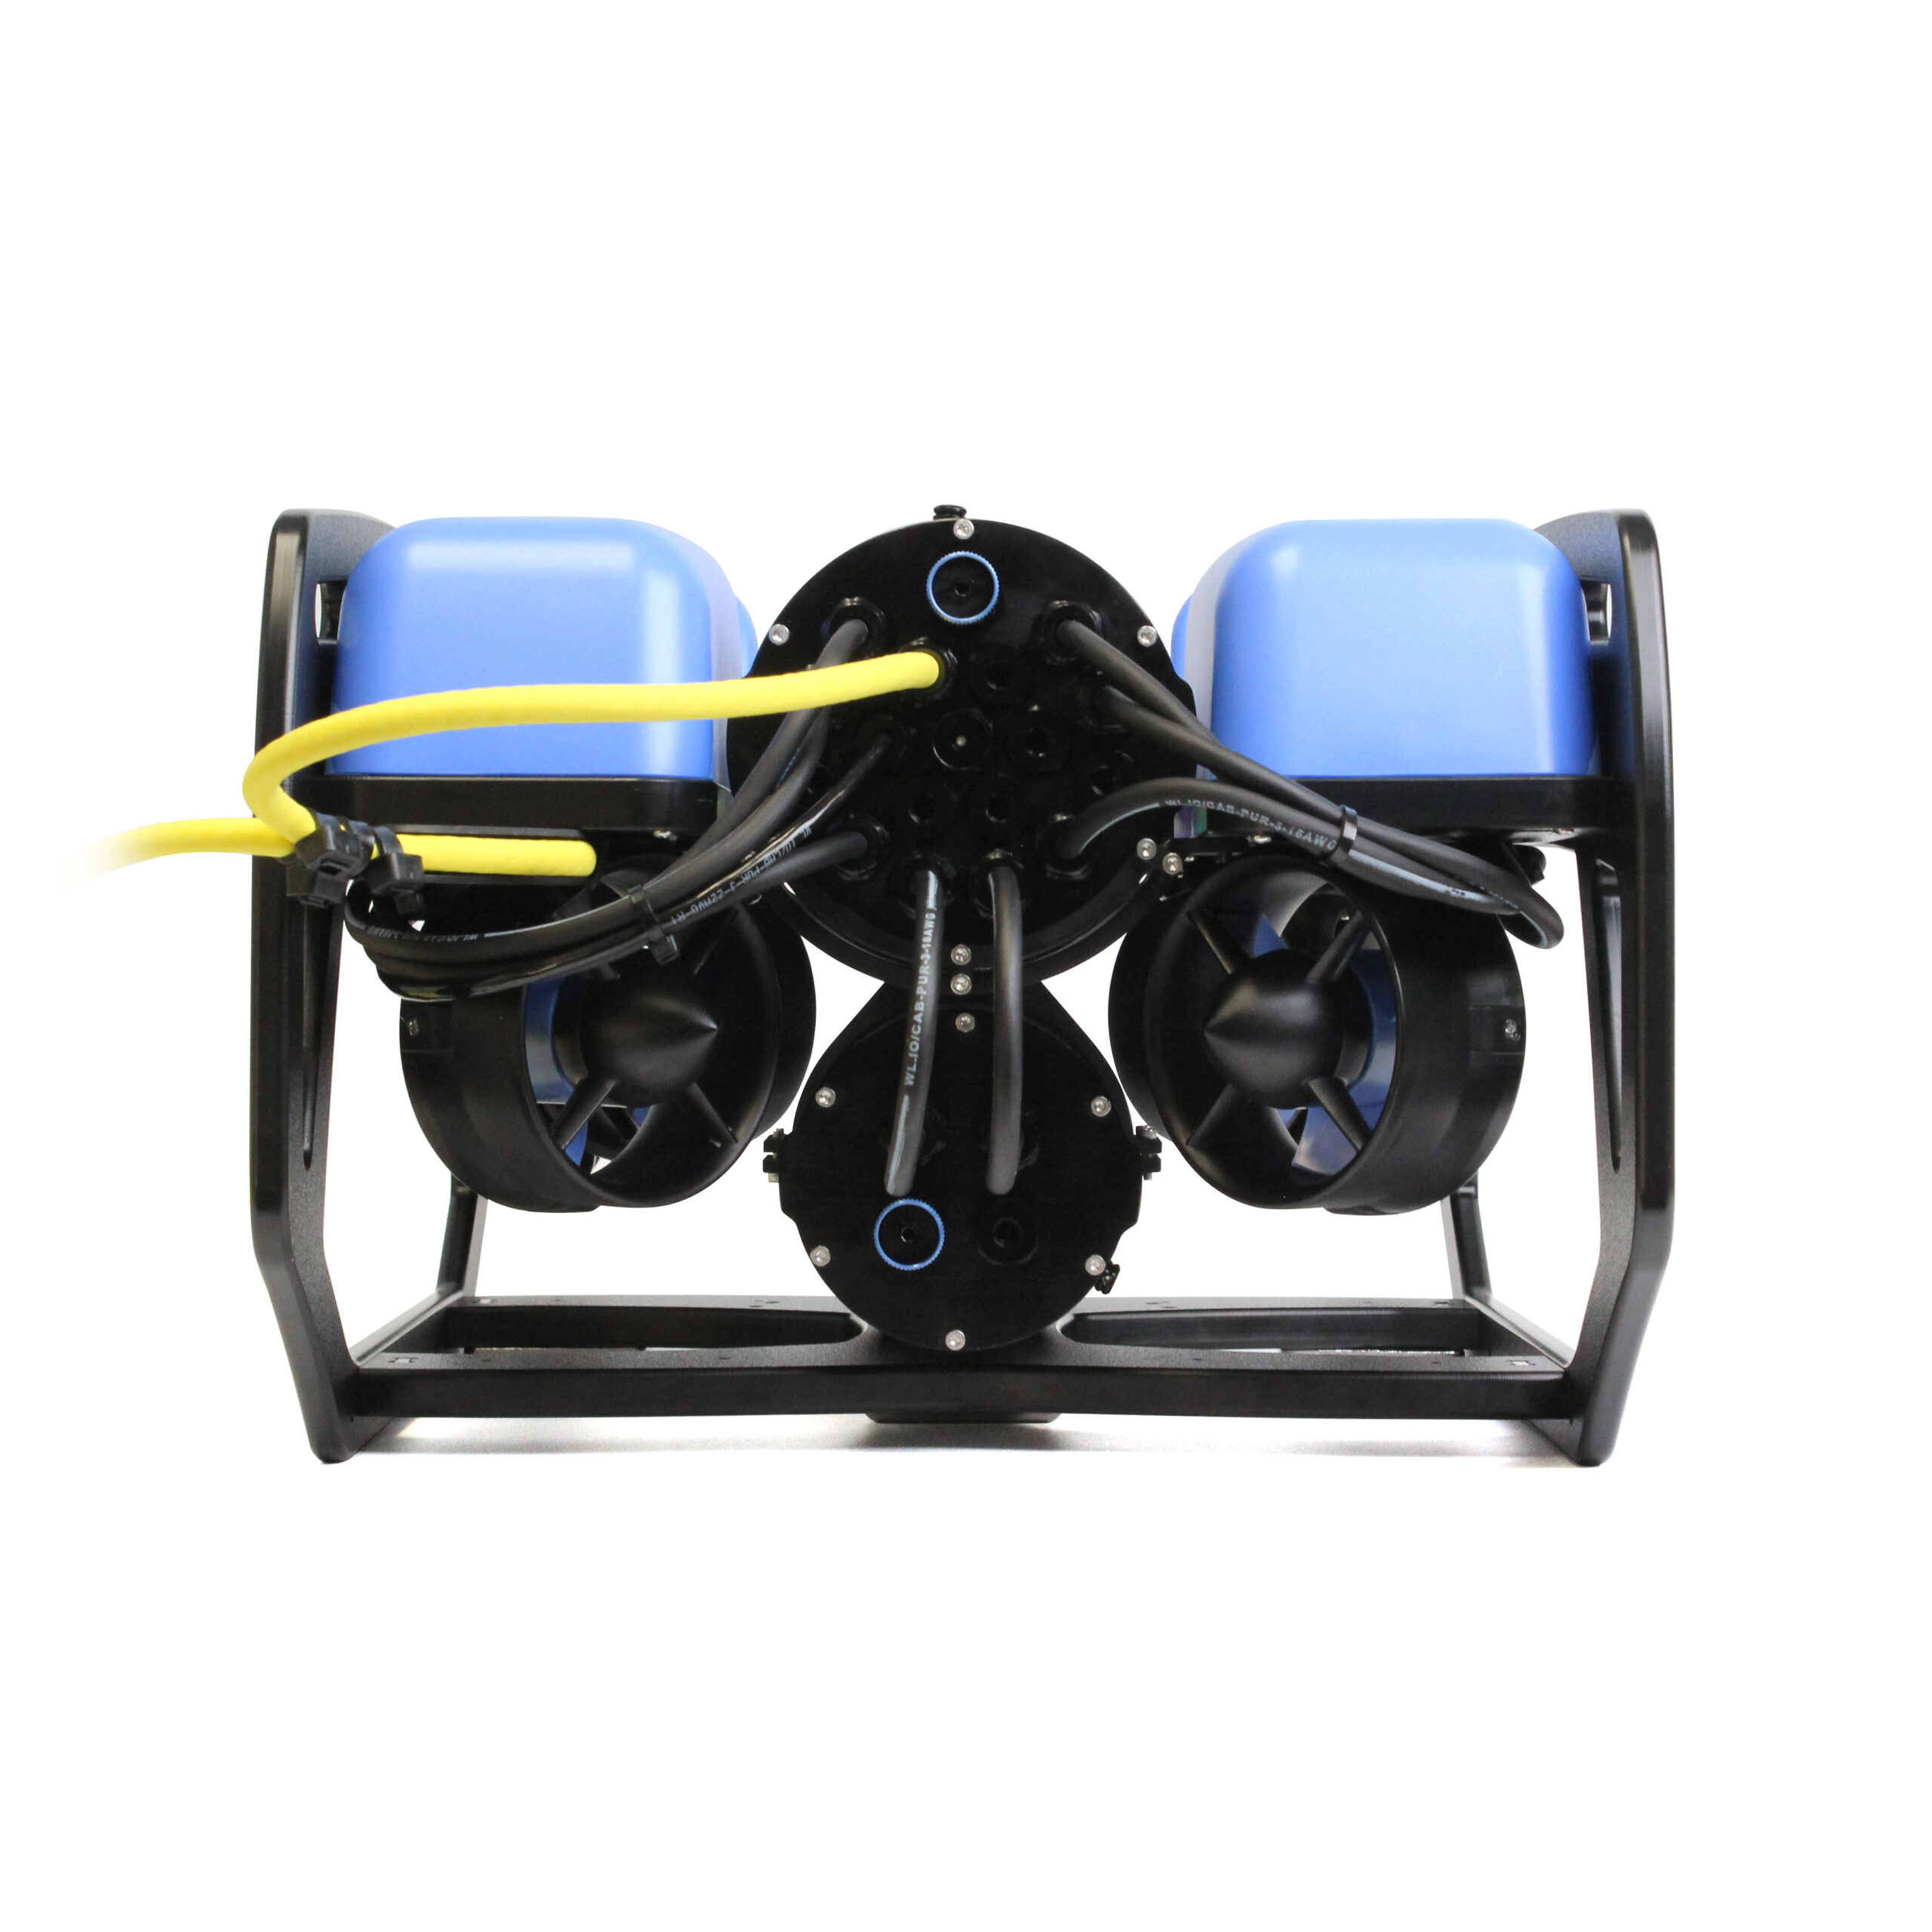 BlueROV2 - Affordable and Capable Underwater ROV